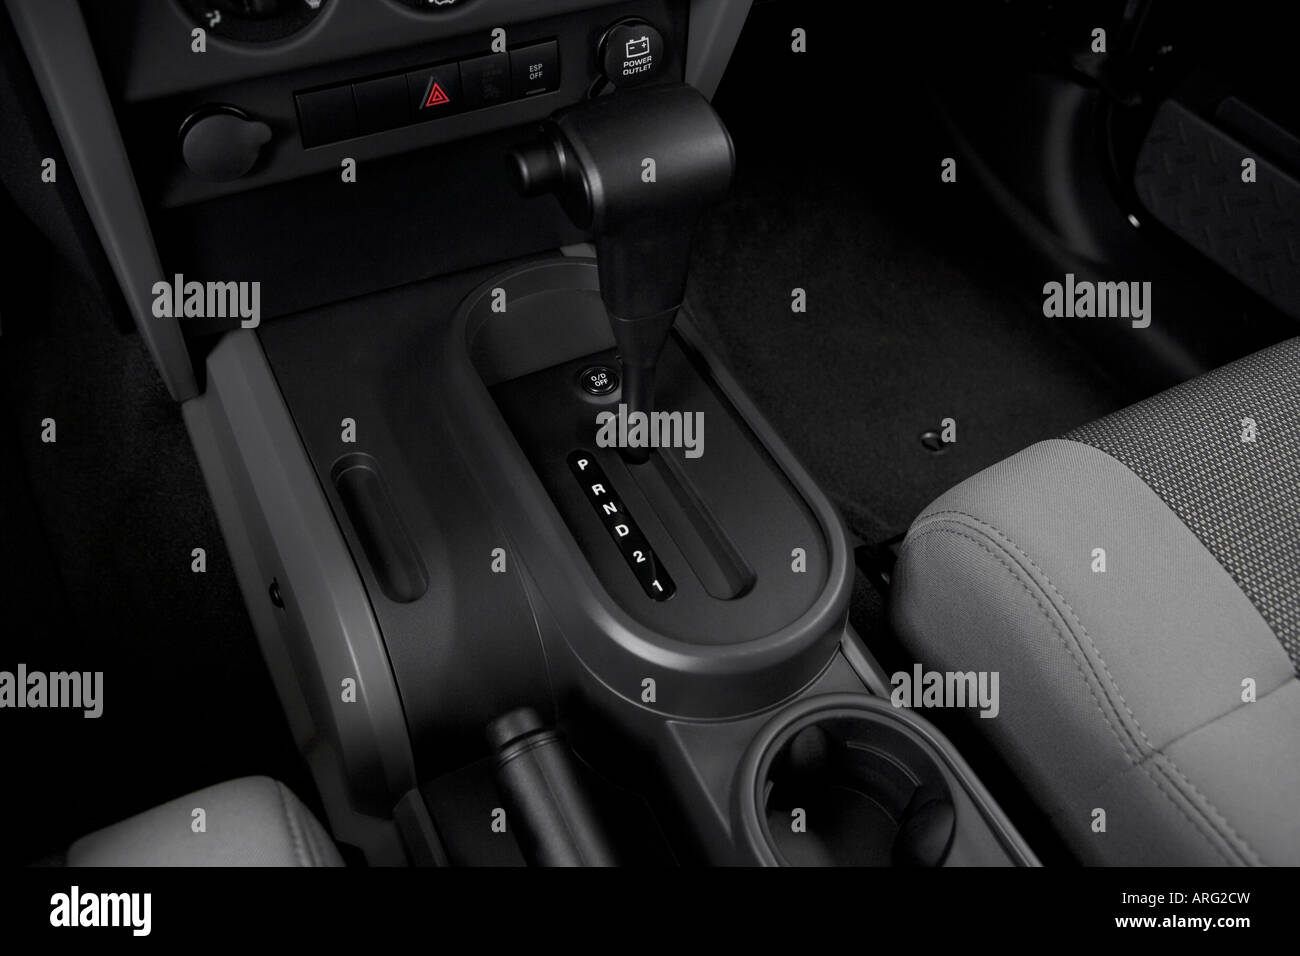 2007 Jeep Wrangler Unlimited X in Black - Gear shifter/center console Stock  Photo - Alamy